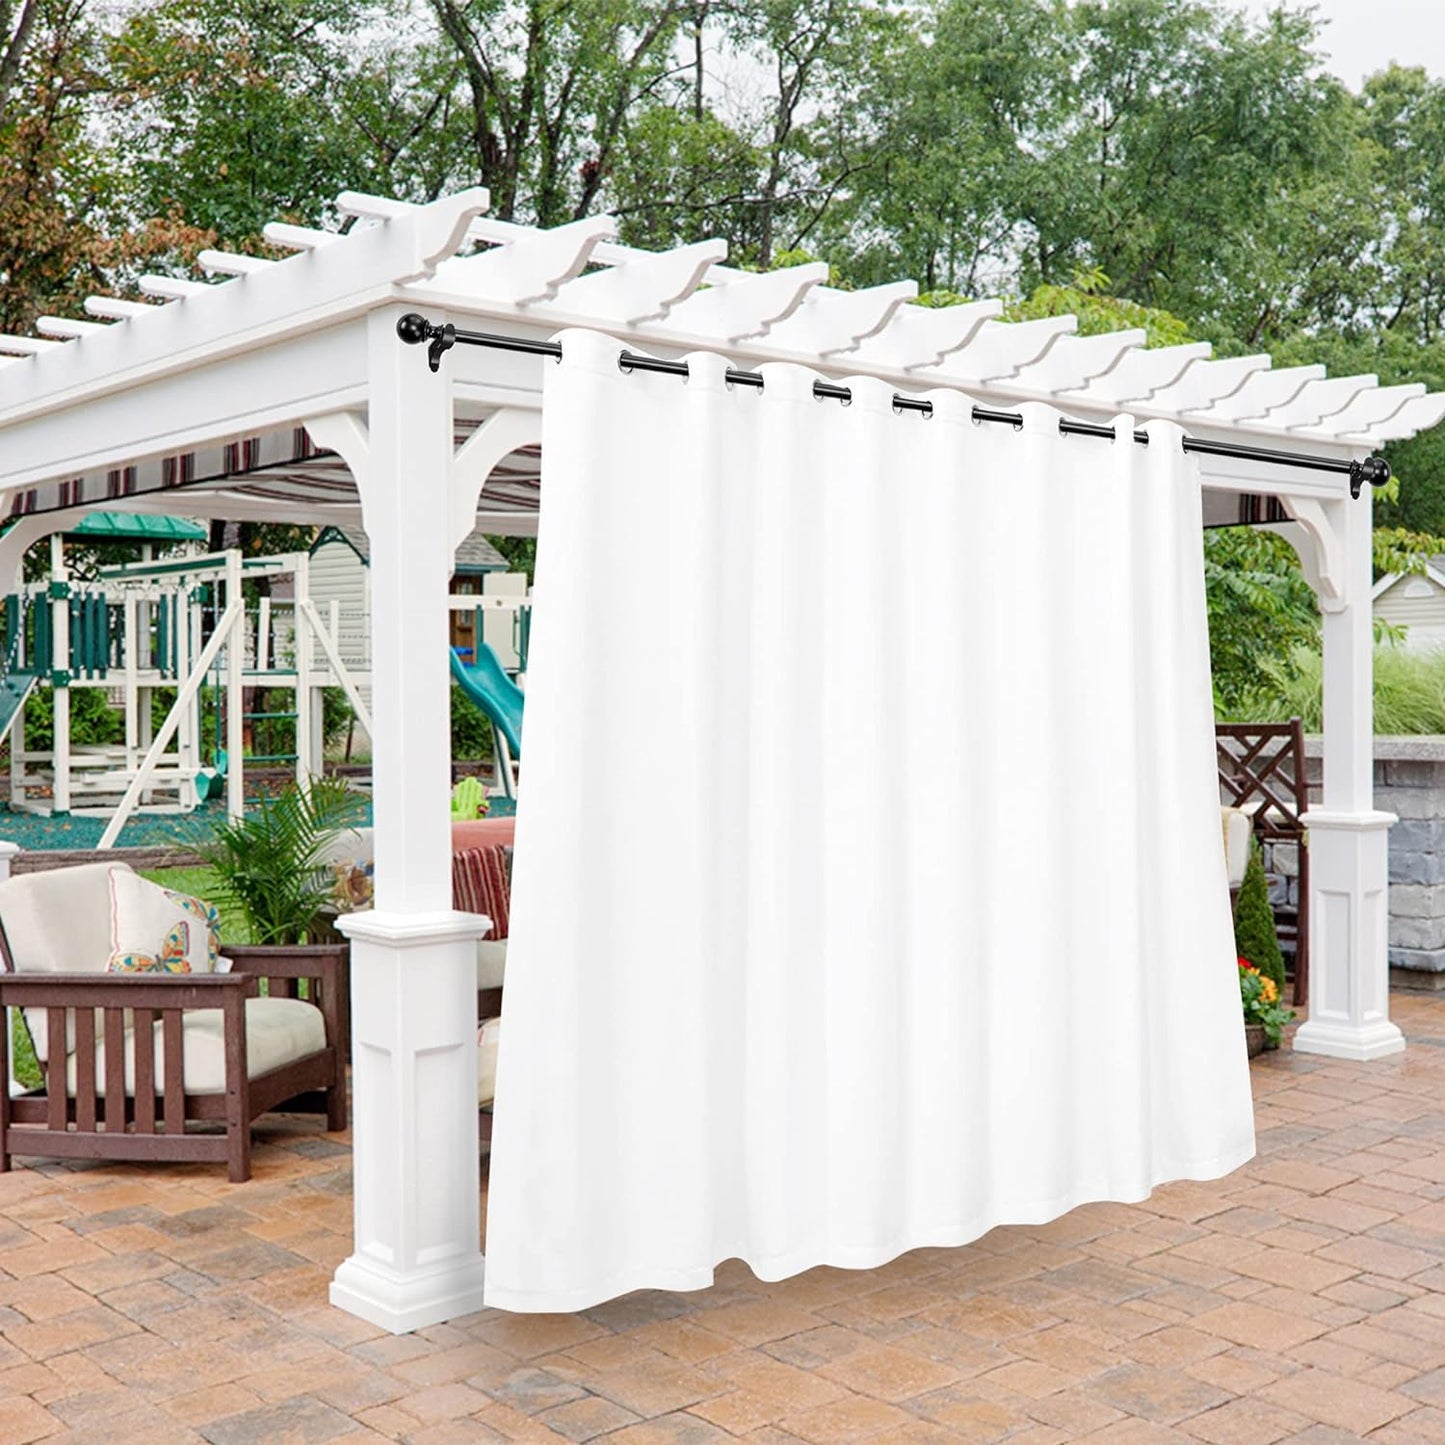 BONZER Outdoor Curtains for Patio Waterproof - Light Blocking Weather Resistant Privacy Grommet Blackout Curtains for Gazebo, Porch, Pergola, Cabana, Deck, Sunroom, 1 Panel, 52W X 84L Inch, Silver  BONZER White 120W X 95 Inch 